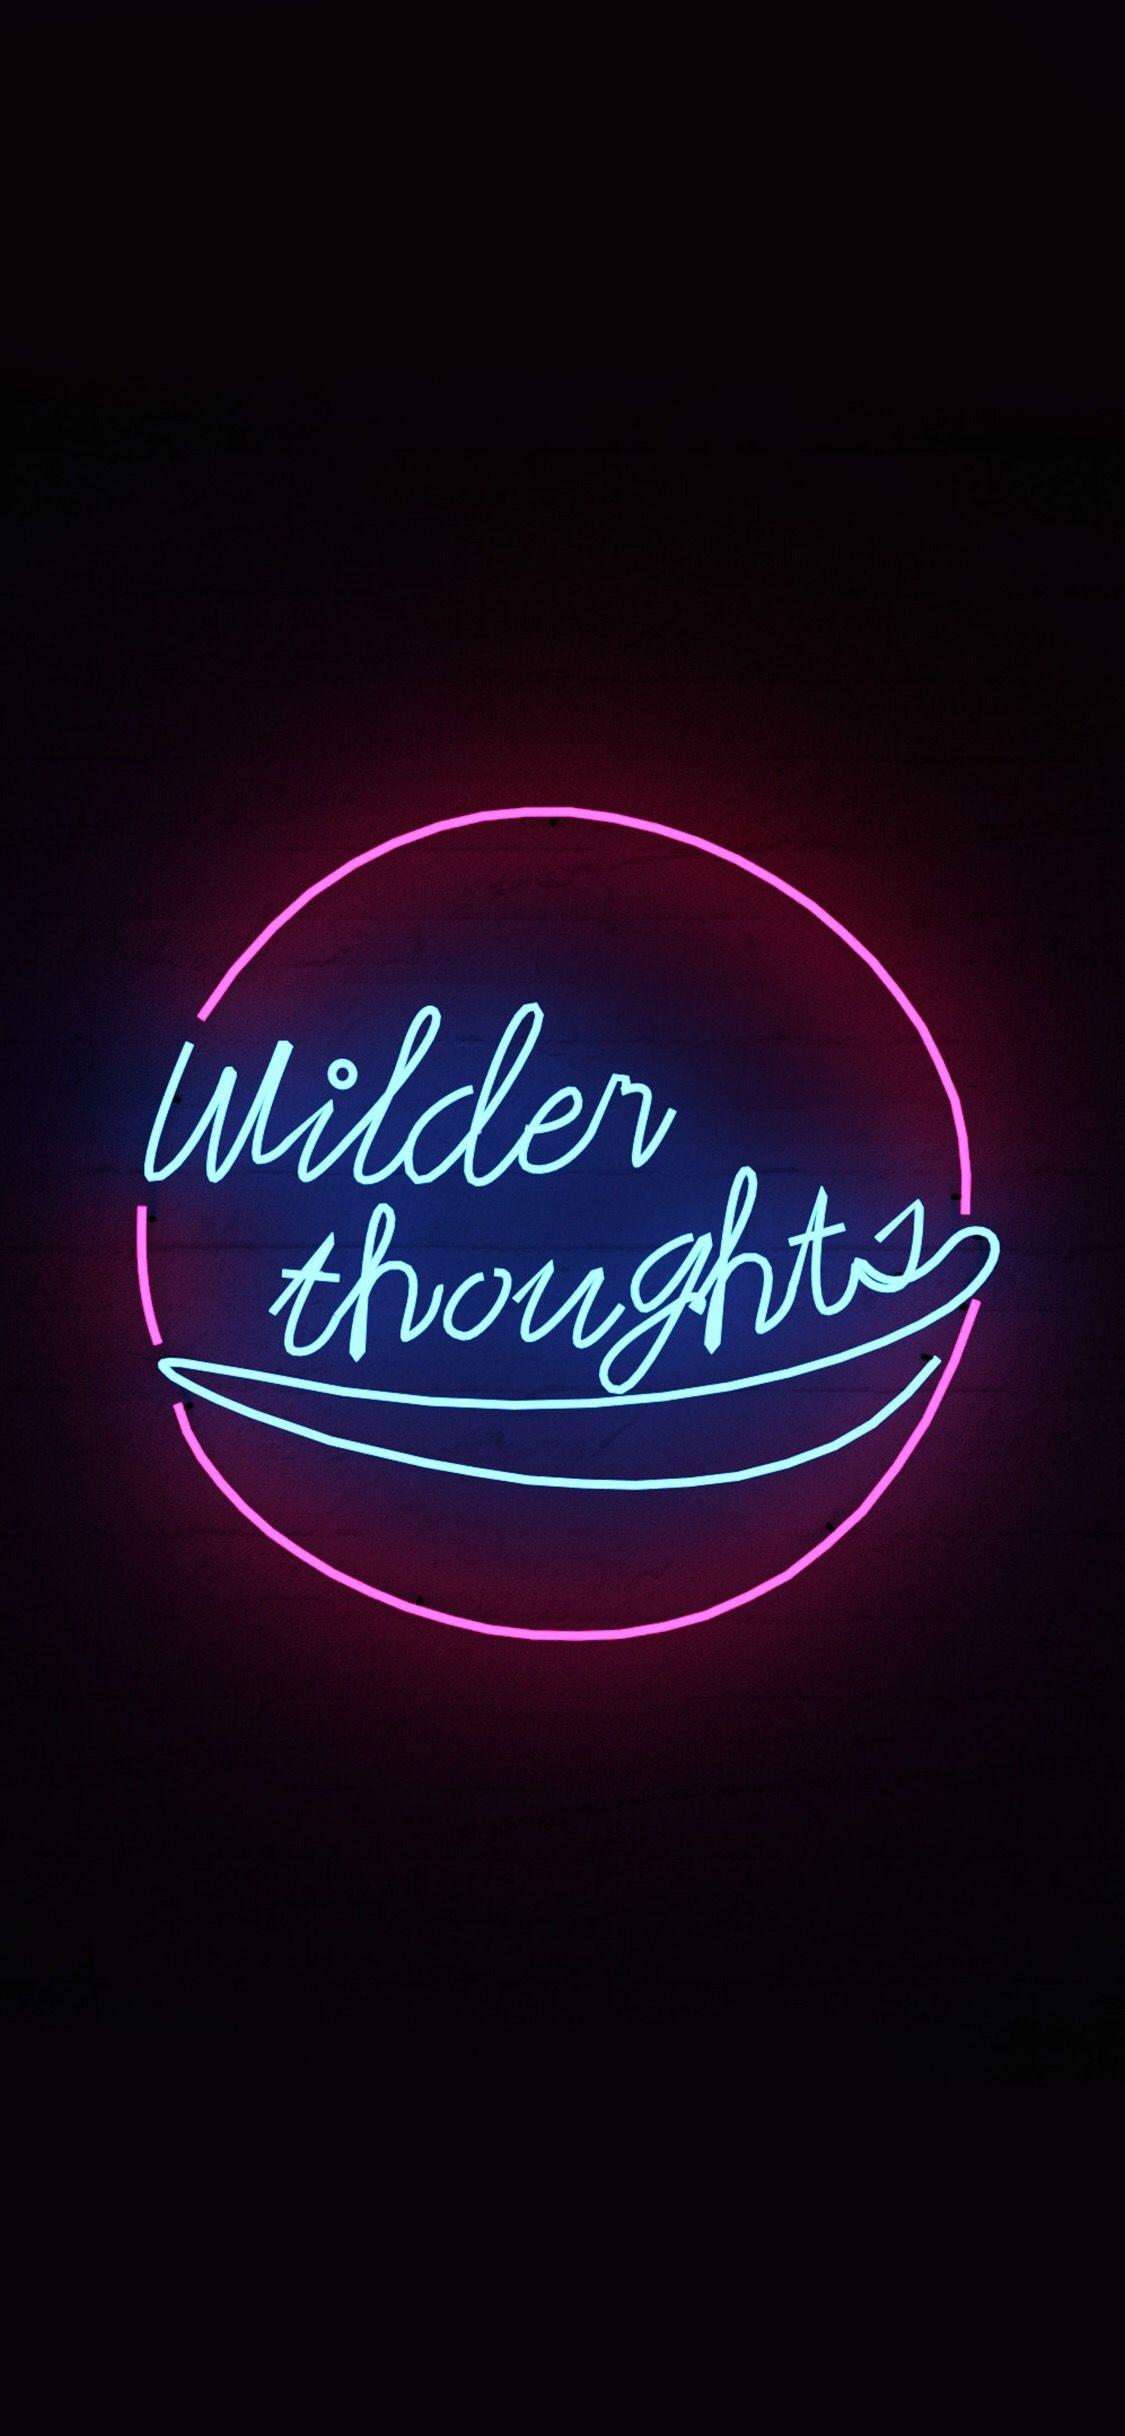 Aesthetic Grunge Neon Signs Wallpaper Free Aesthetic Grunge Neon Signs Background